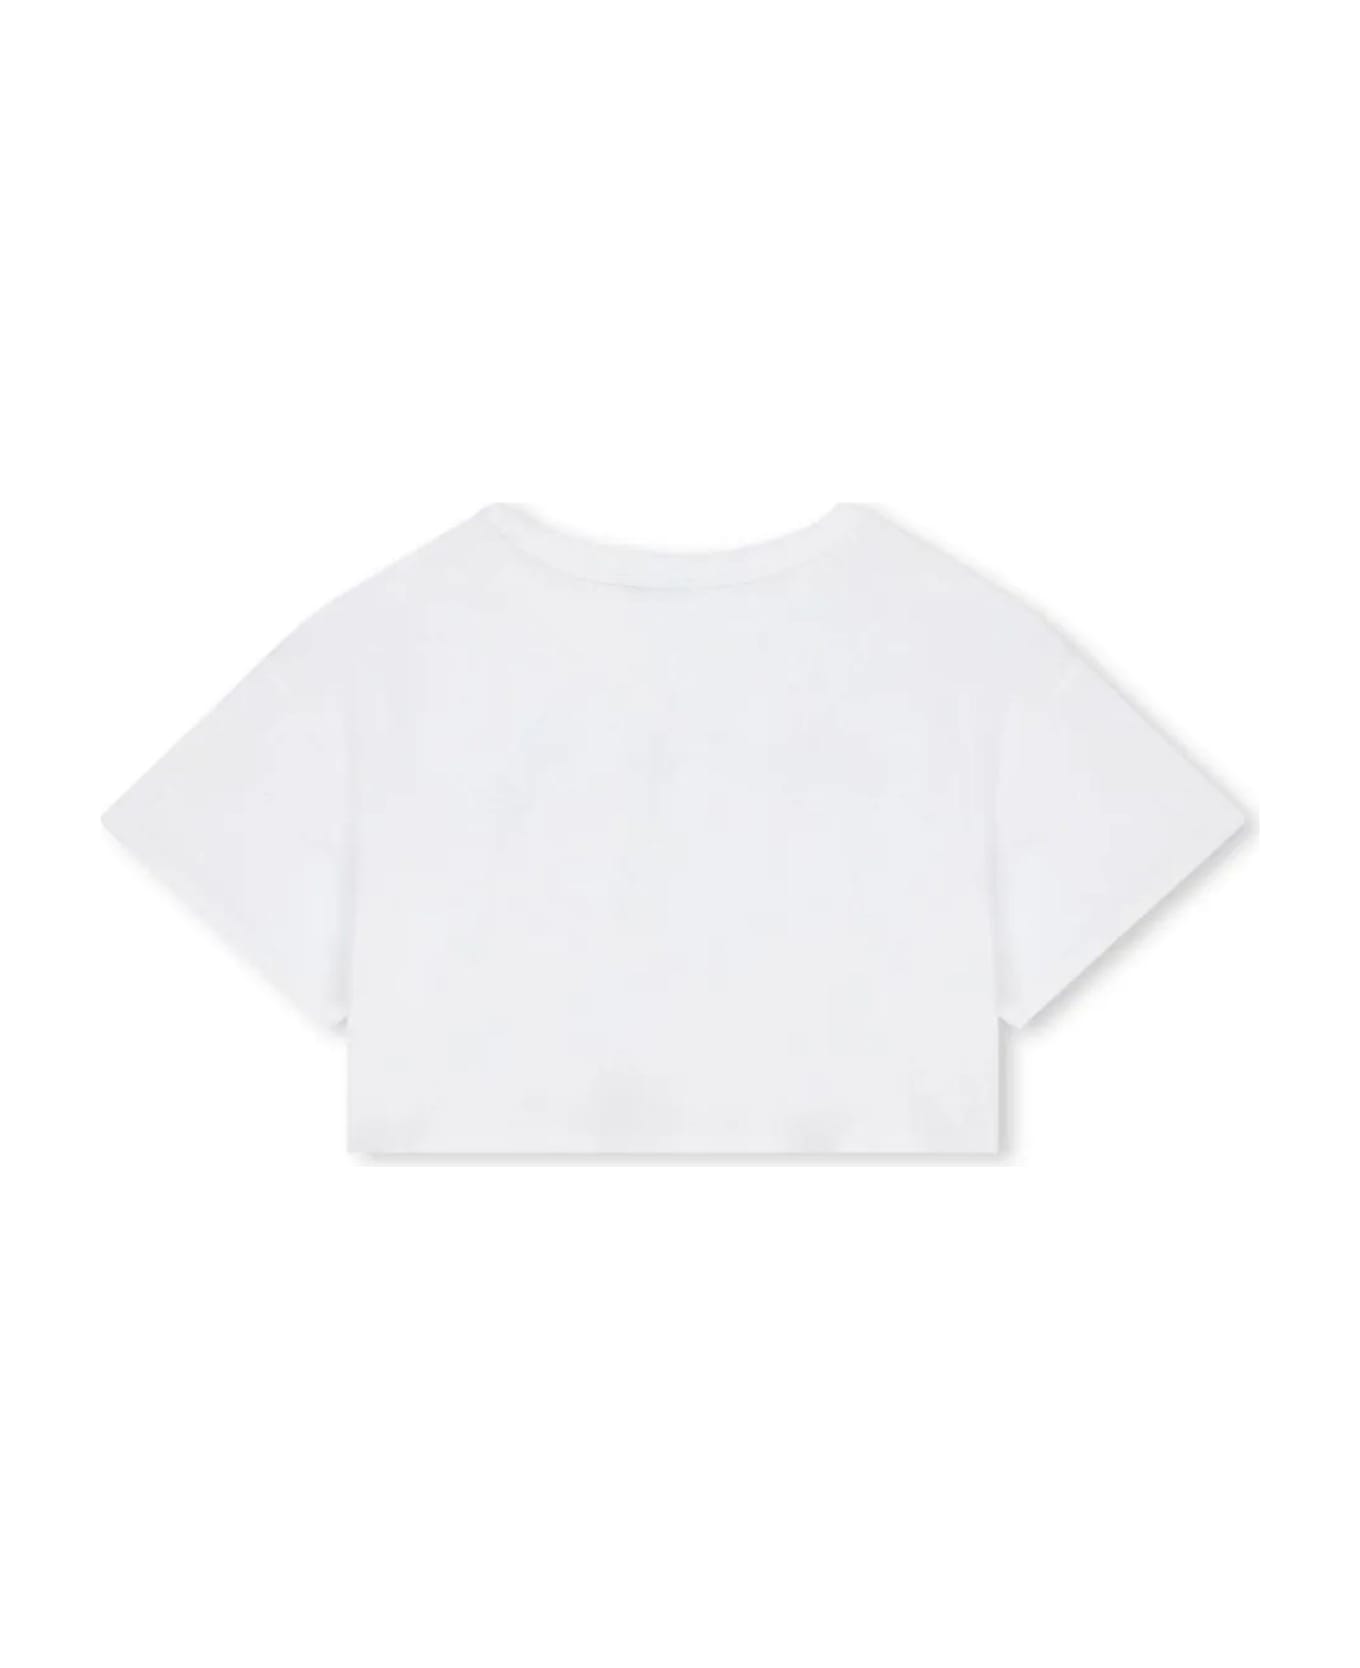 Marc Jacobs T-shirts And Polos White - White Tシャツ＆ポロシャツ